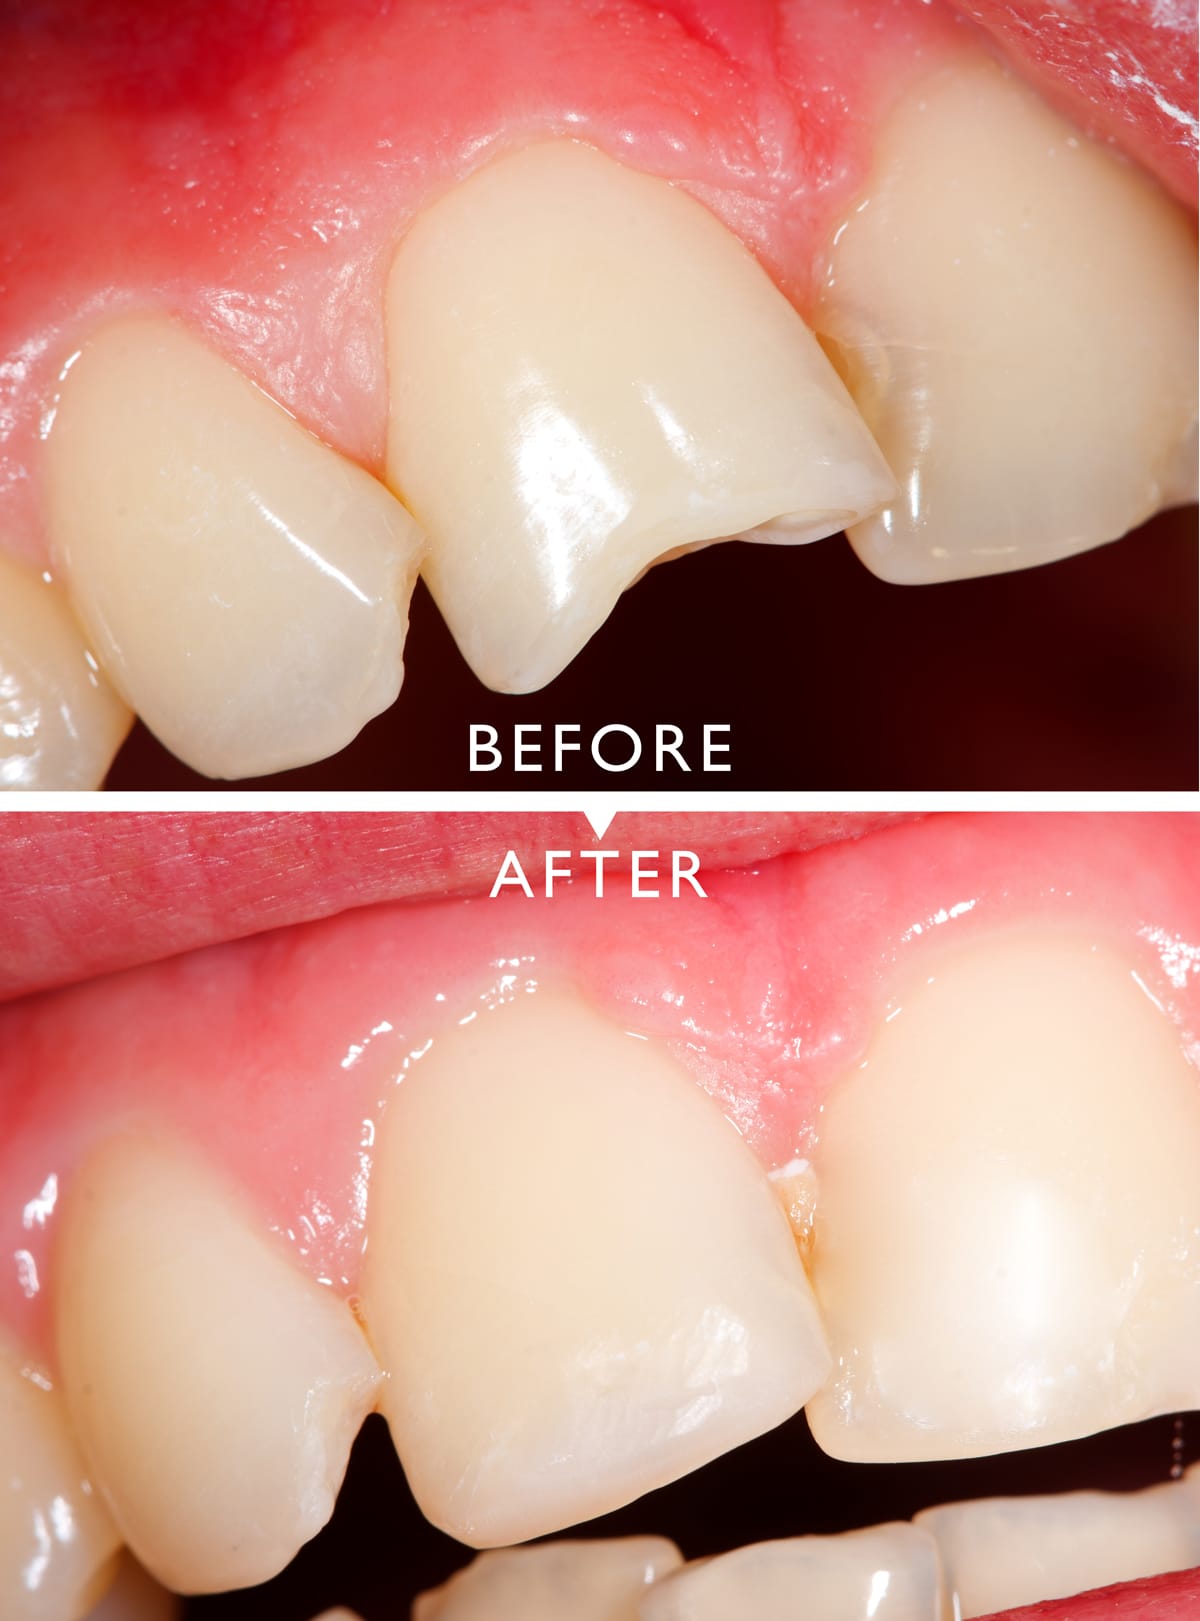 Treating patient with cracked tooth syndrome in one visit - Rhondium Dental